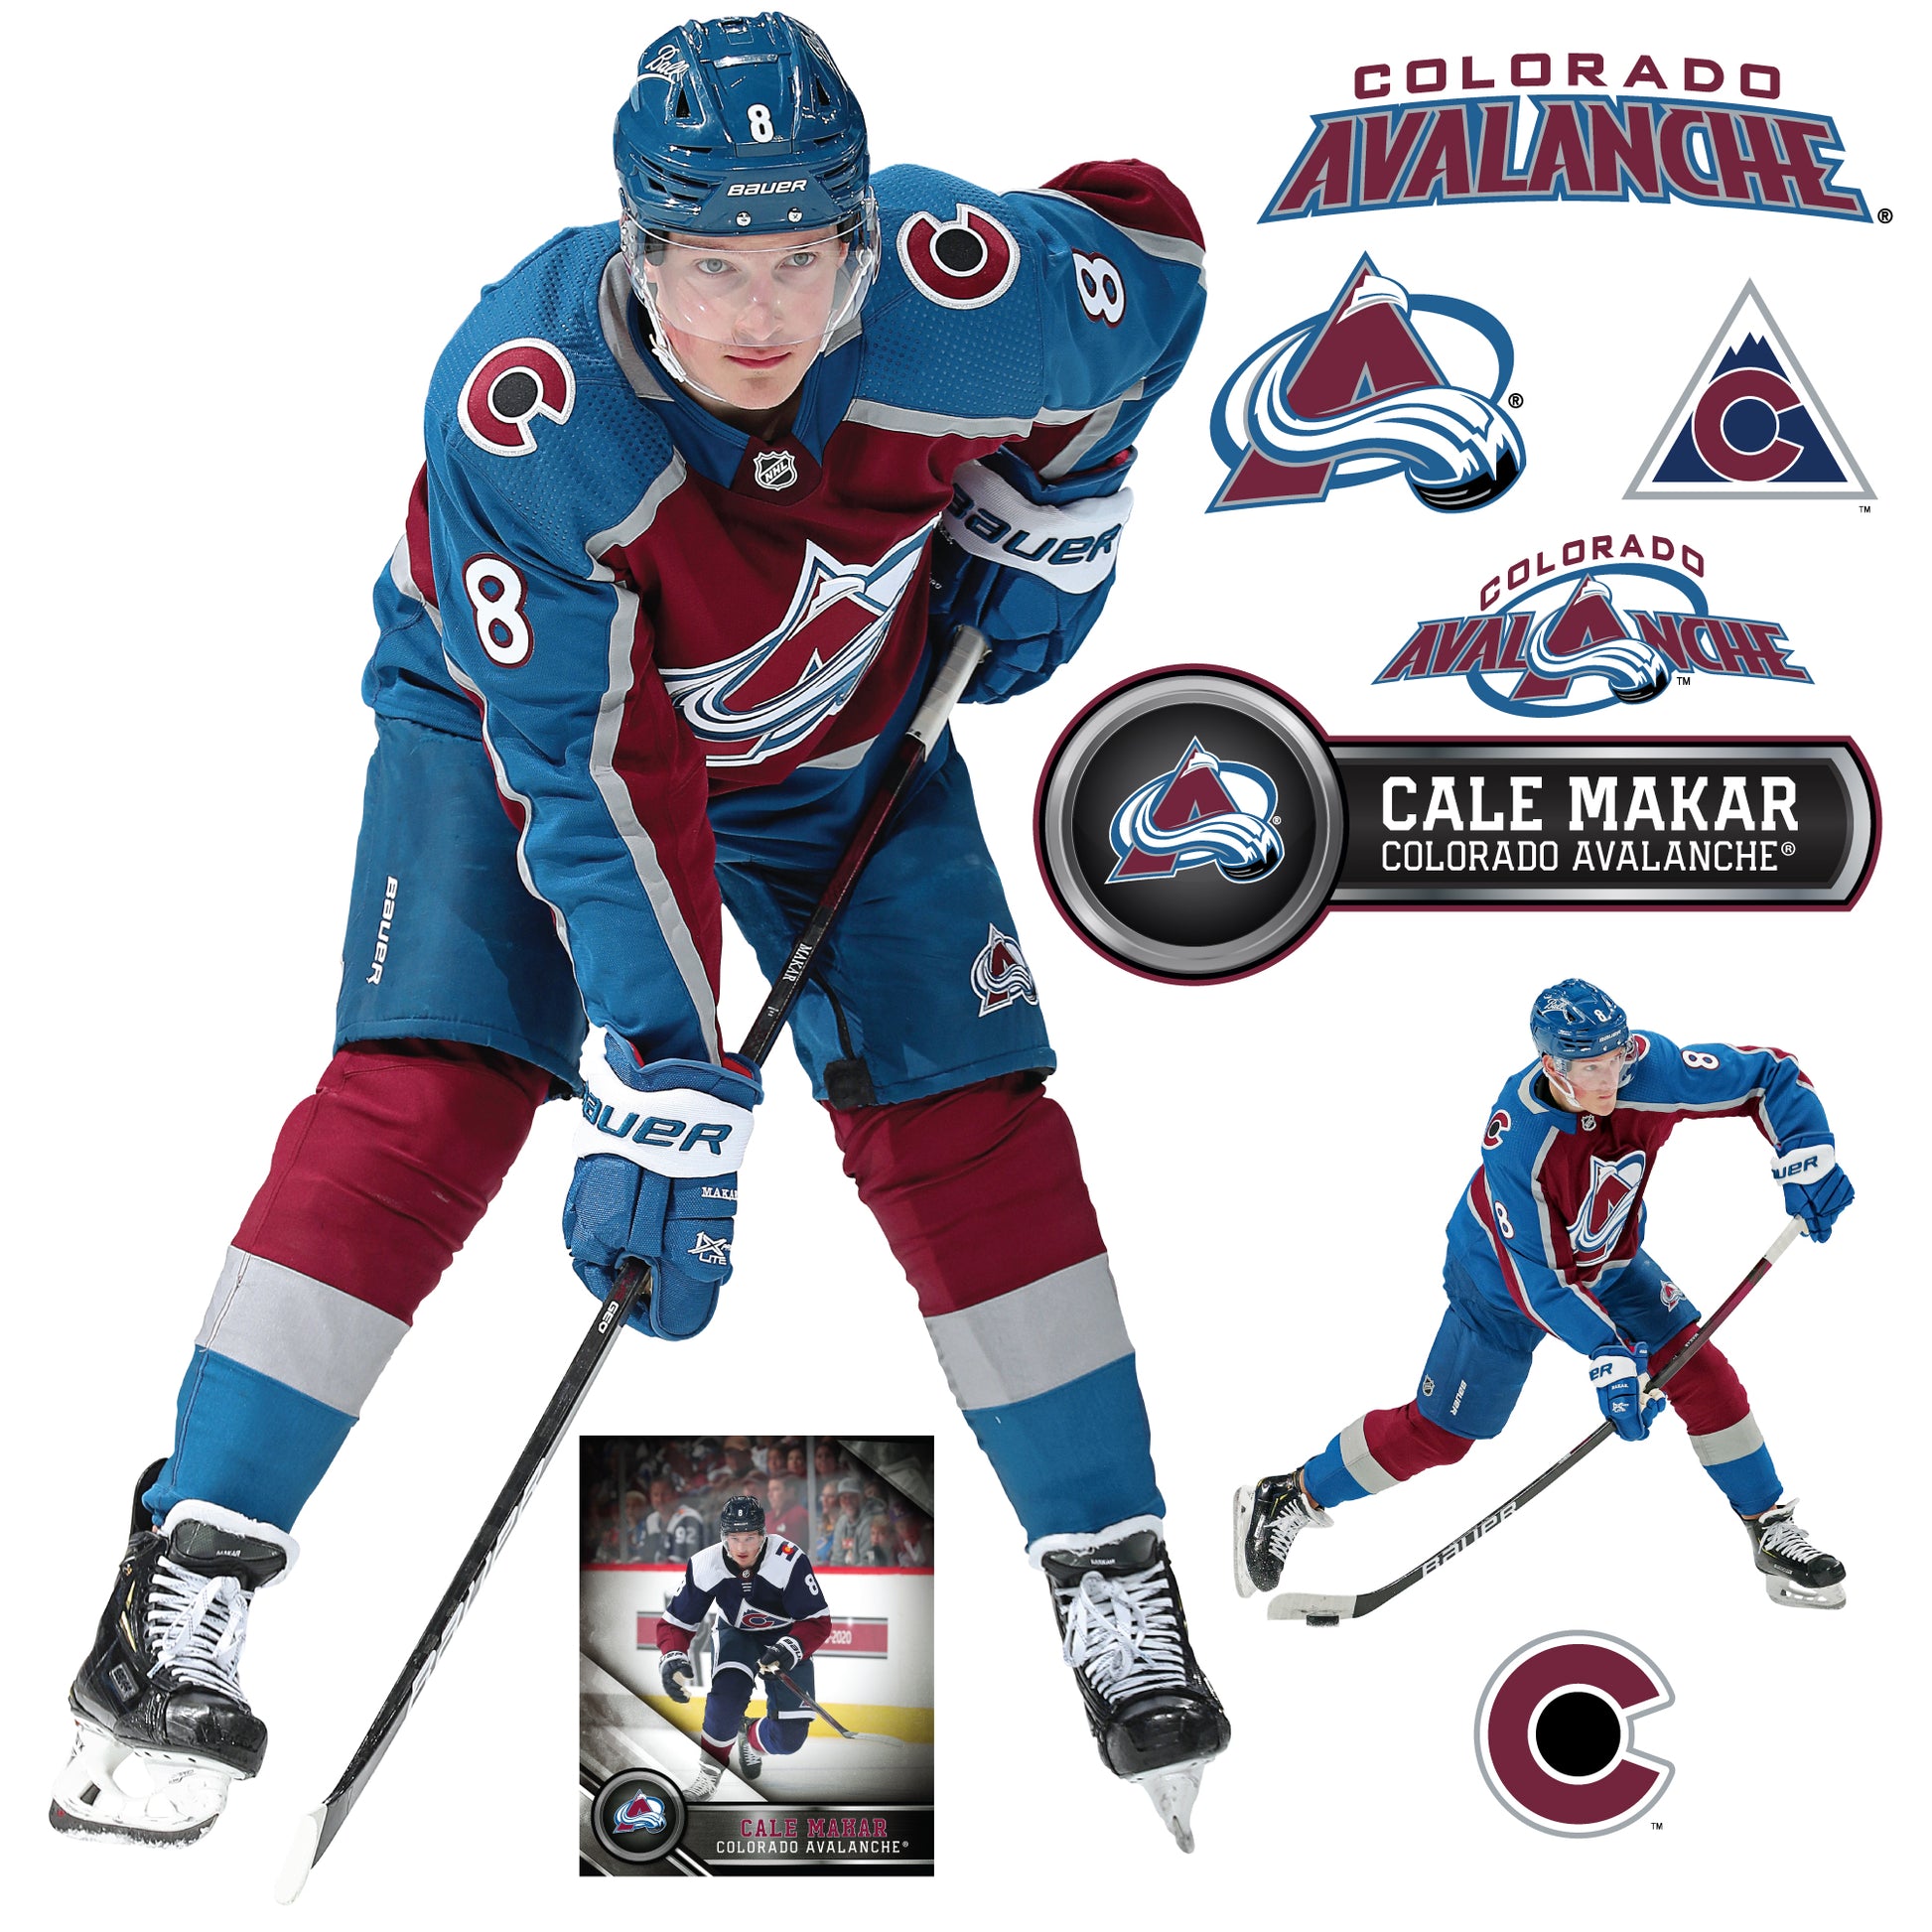 Cale Makar Posters for Sale